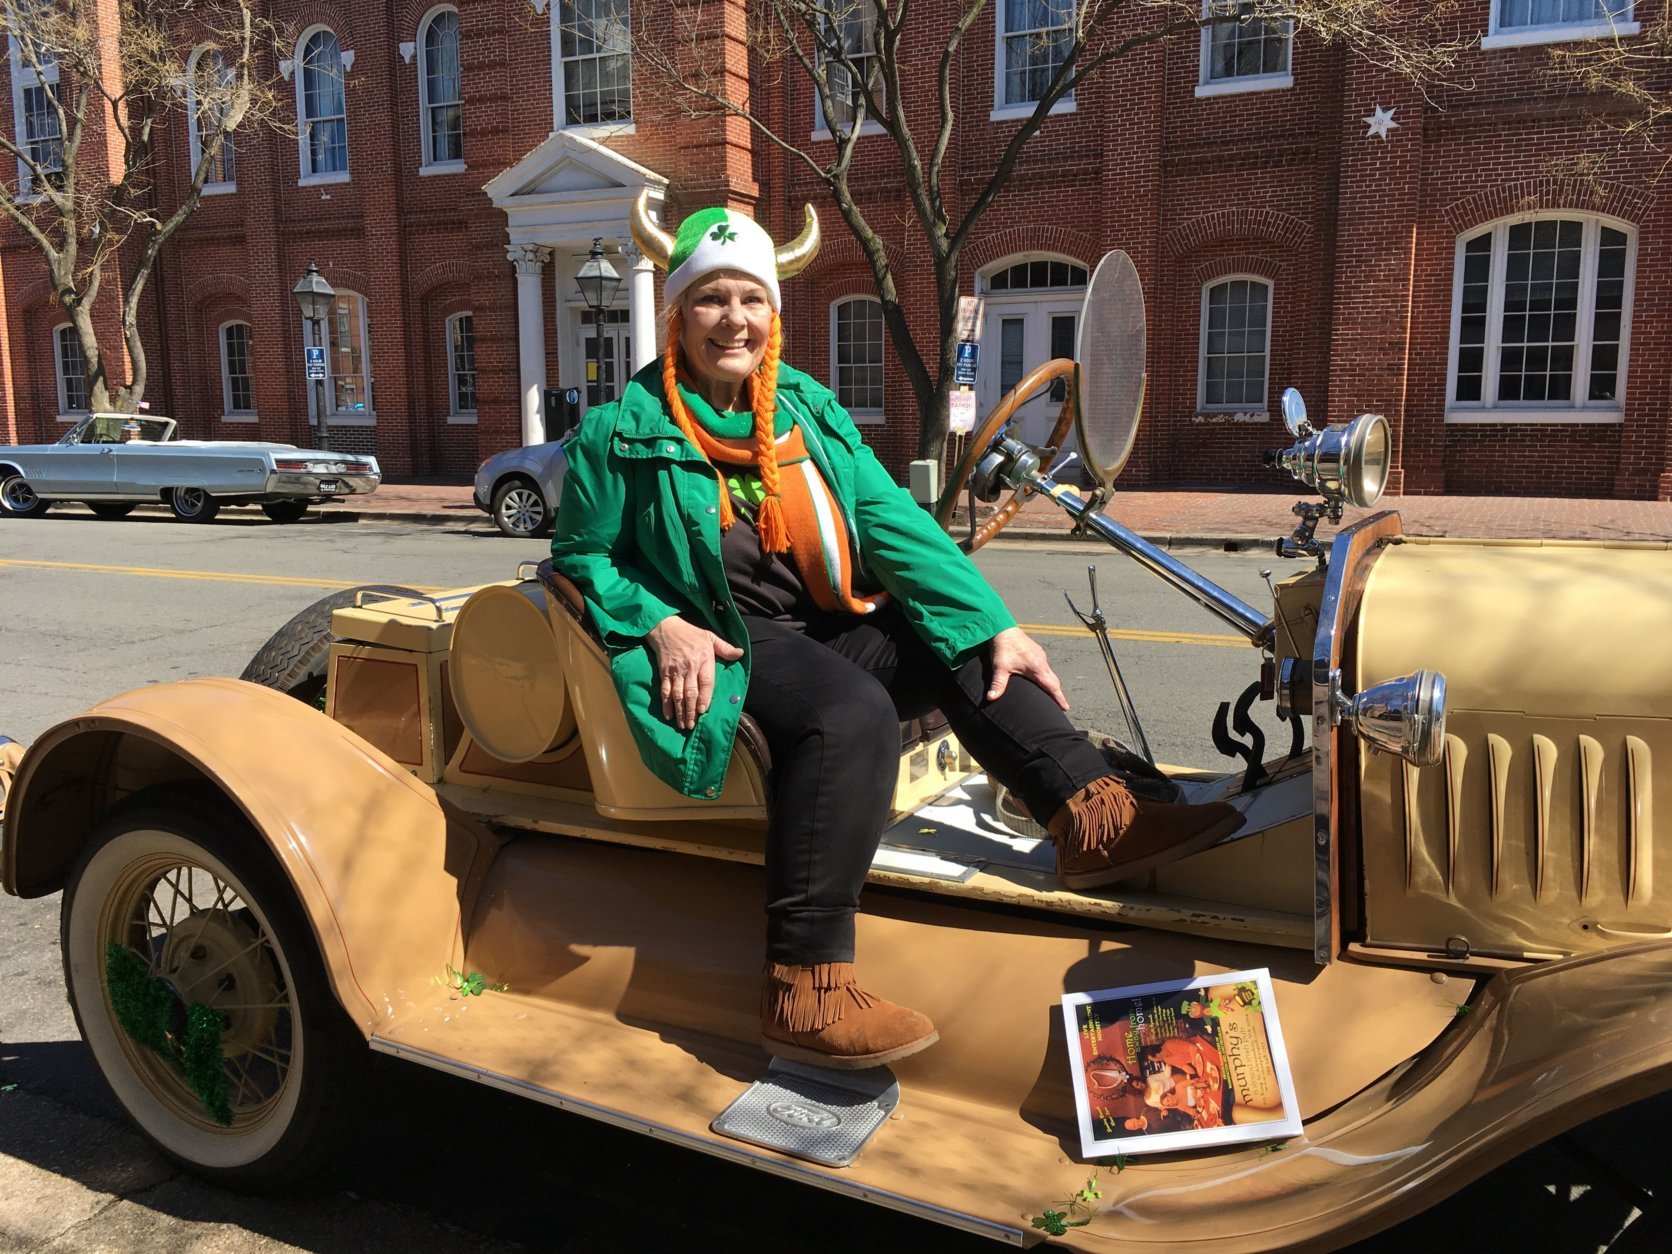 “I am Irish and I’m part Viking, hence the horns,” Debbie Bell told WTOP as she sat on the 1923 Model T Ford Speedster she and her husband brought up from Fredericksburg, Va. Bell donned a plush green and white helmet with a shamrock in the middle and gold horns pointed skyward. (WTOP/Liz Anderson)